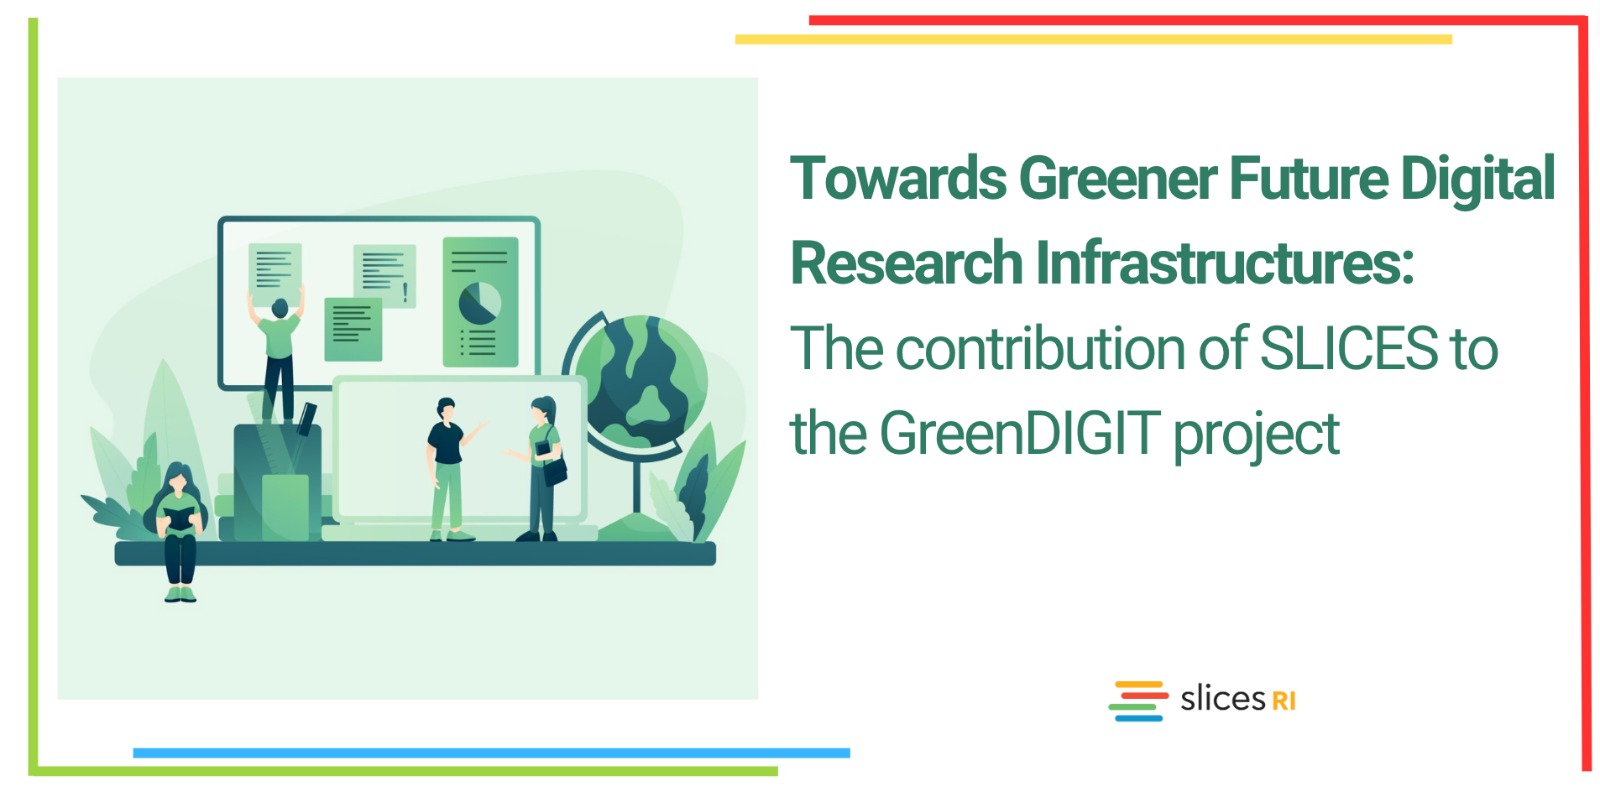 Towards Greener Future Digital Research Infrastructures.The contribution of SLICES to the GreenDIGIT project.